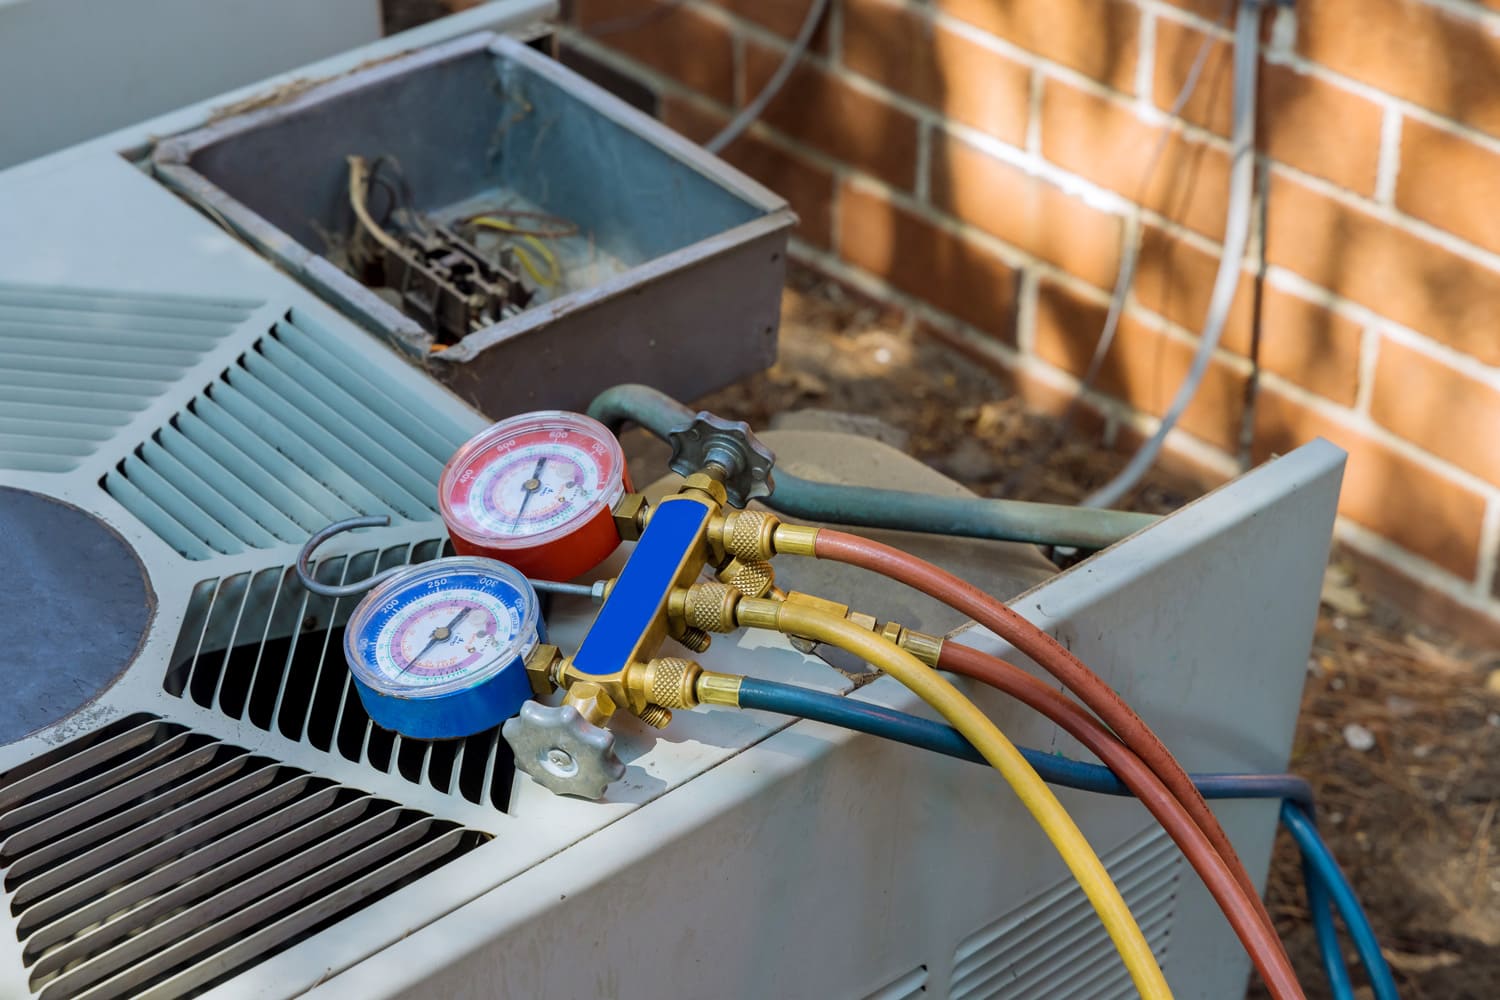 Air conditioning for technician is checking air conditioner measuring equipment repairing and servicing